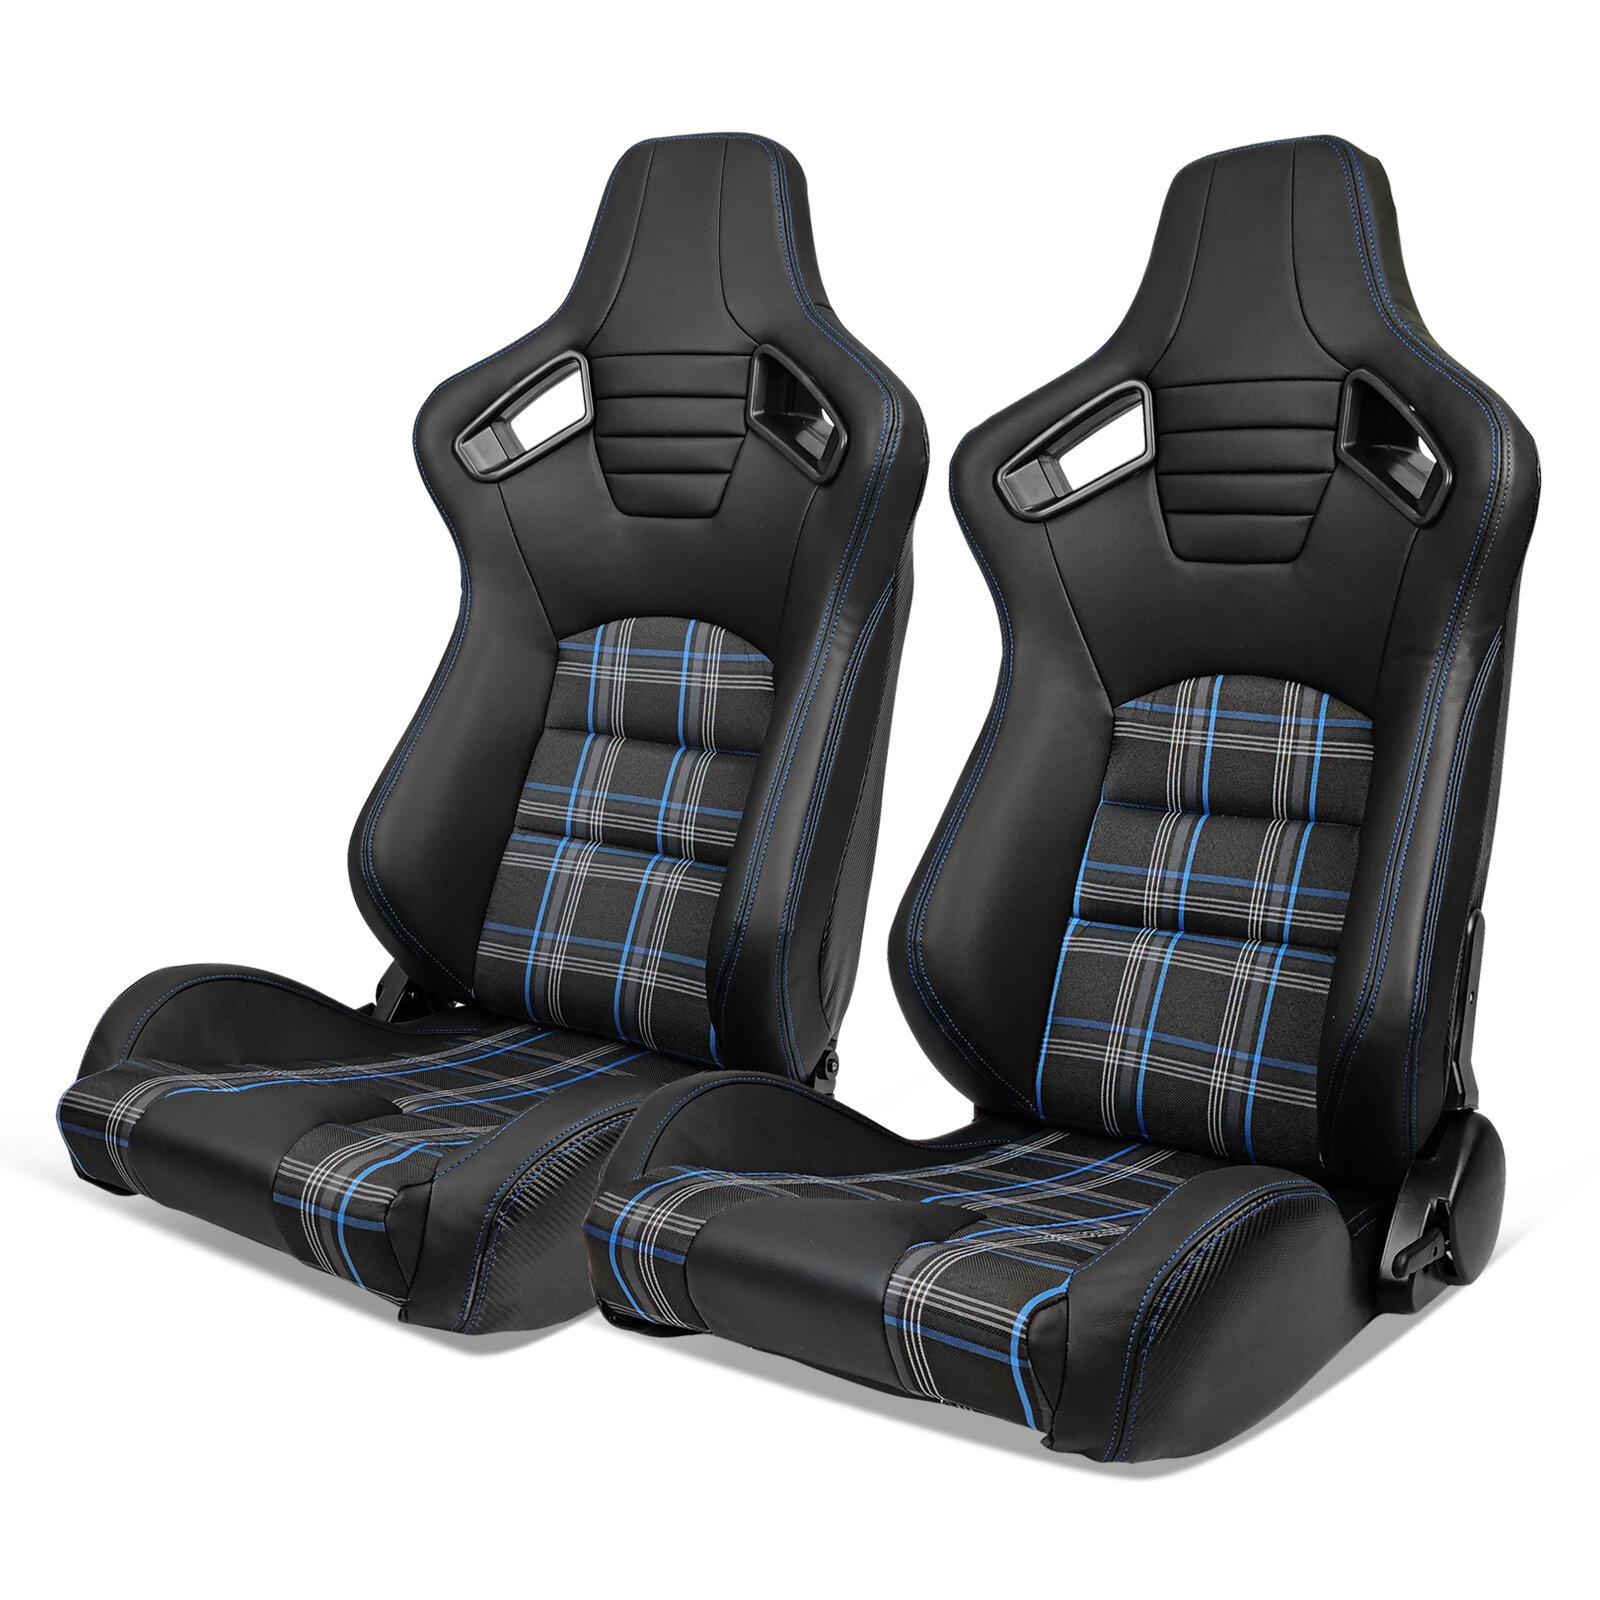 Pair of PVC Leather Racing Bucket Seats with Dual Sliders Ship from USA Warehouse Racing Seats Black with White Stitching 